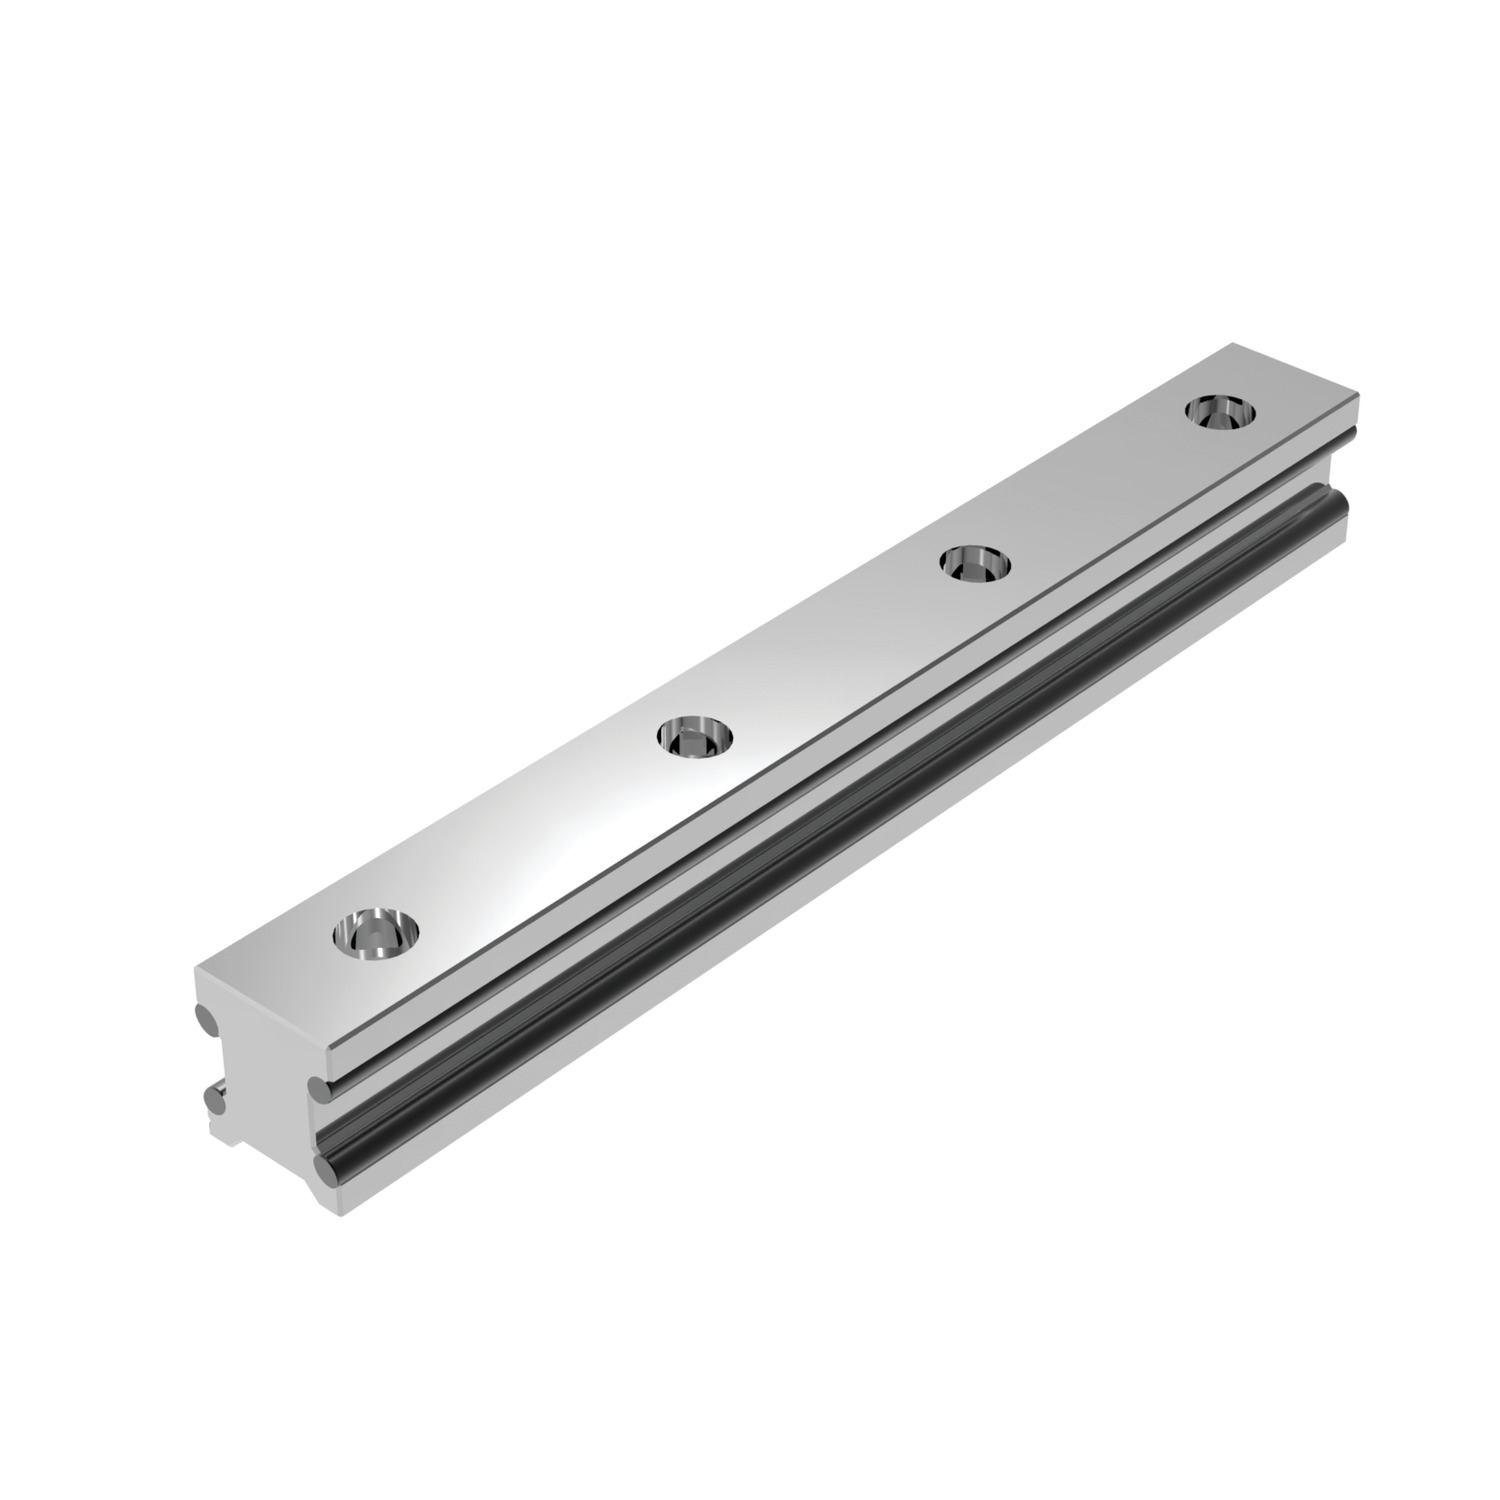 Aluminium Guideways Aluminium front fixing linear rail 15mm, 20 and 25mm. Lightweight rails that ensure performance at up to 60% reduced weight compared to steel versions.